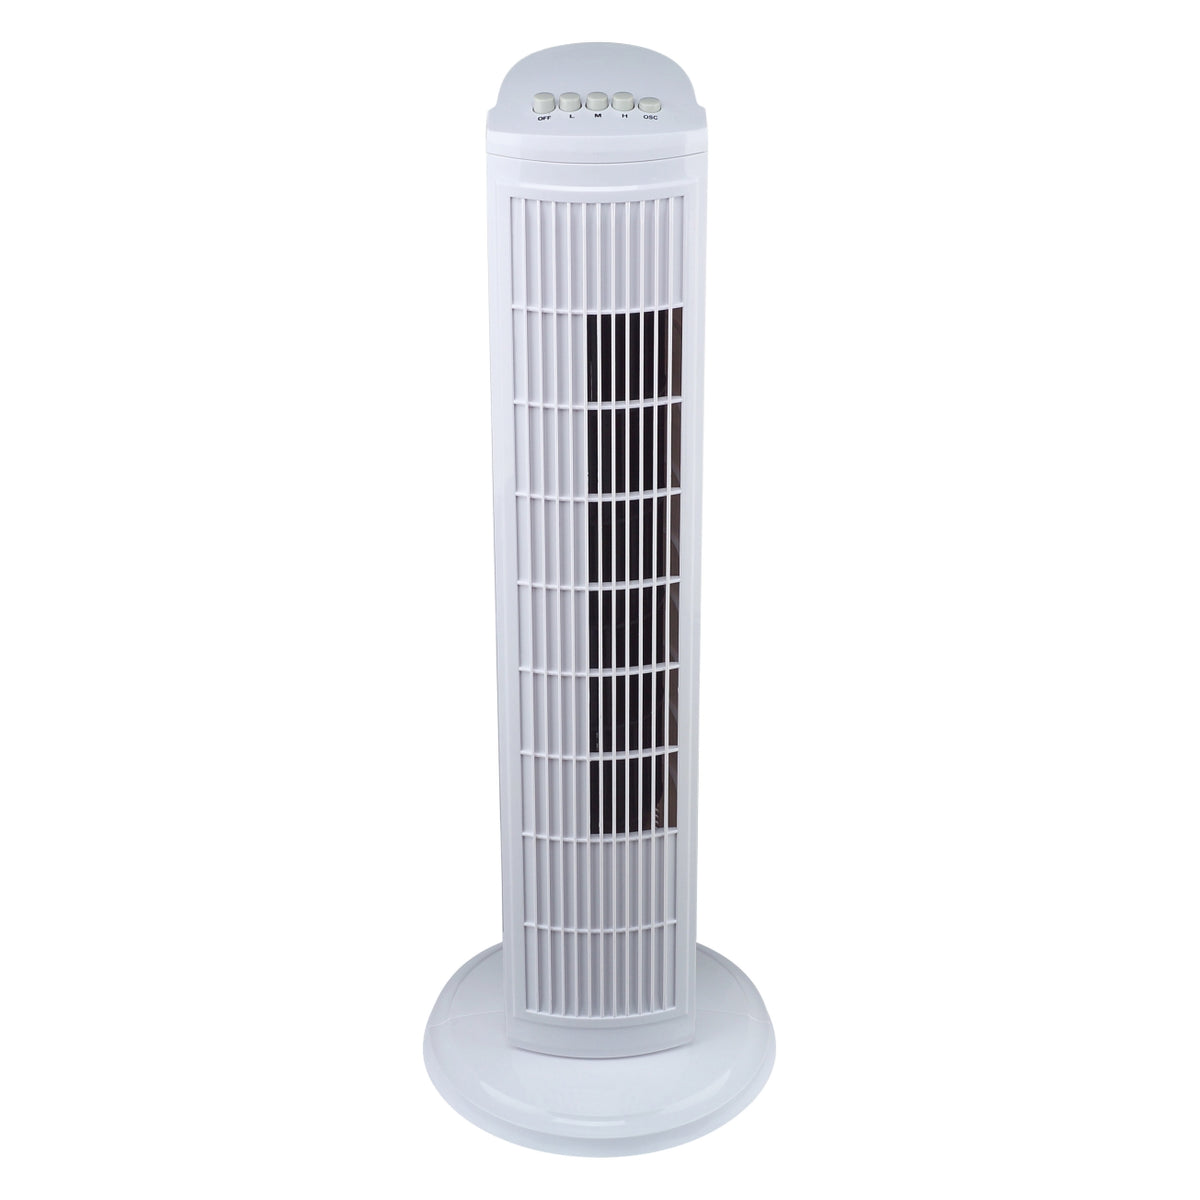 buy tower fans at cheap rate in bulk. wholesale & retail bulk venting tools & accessories store.